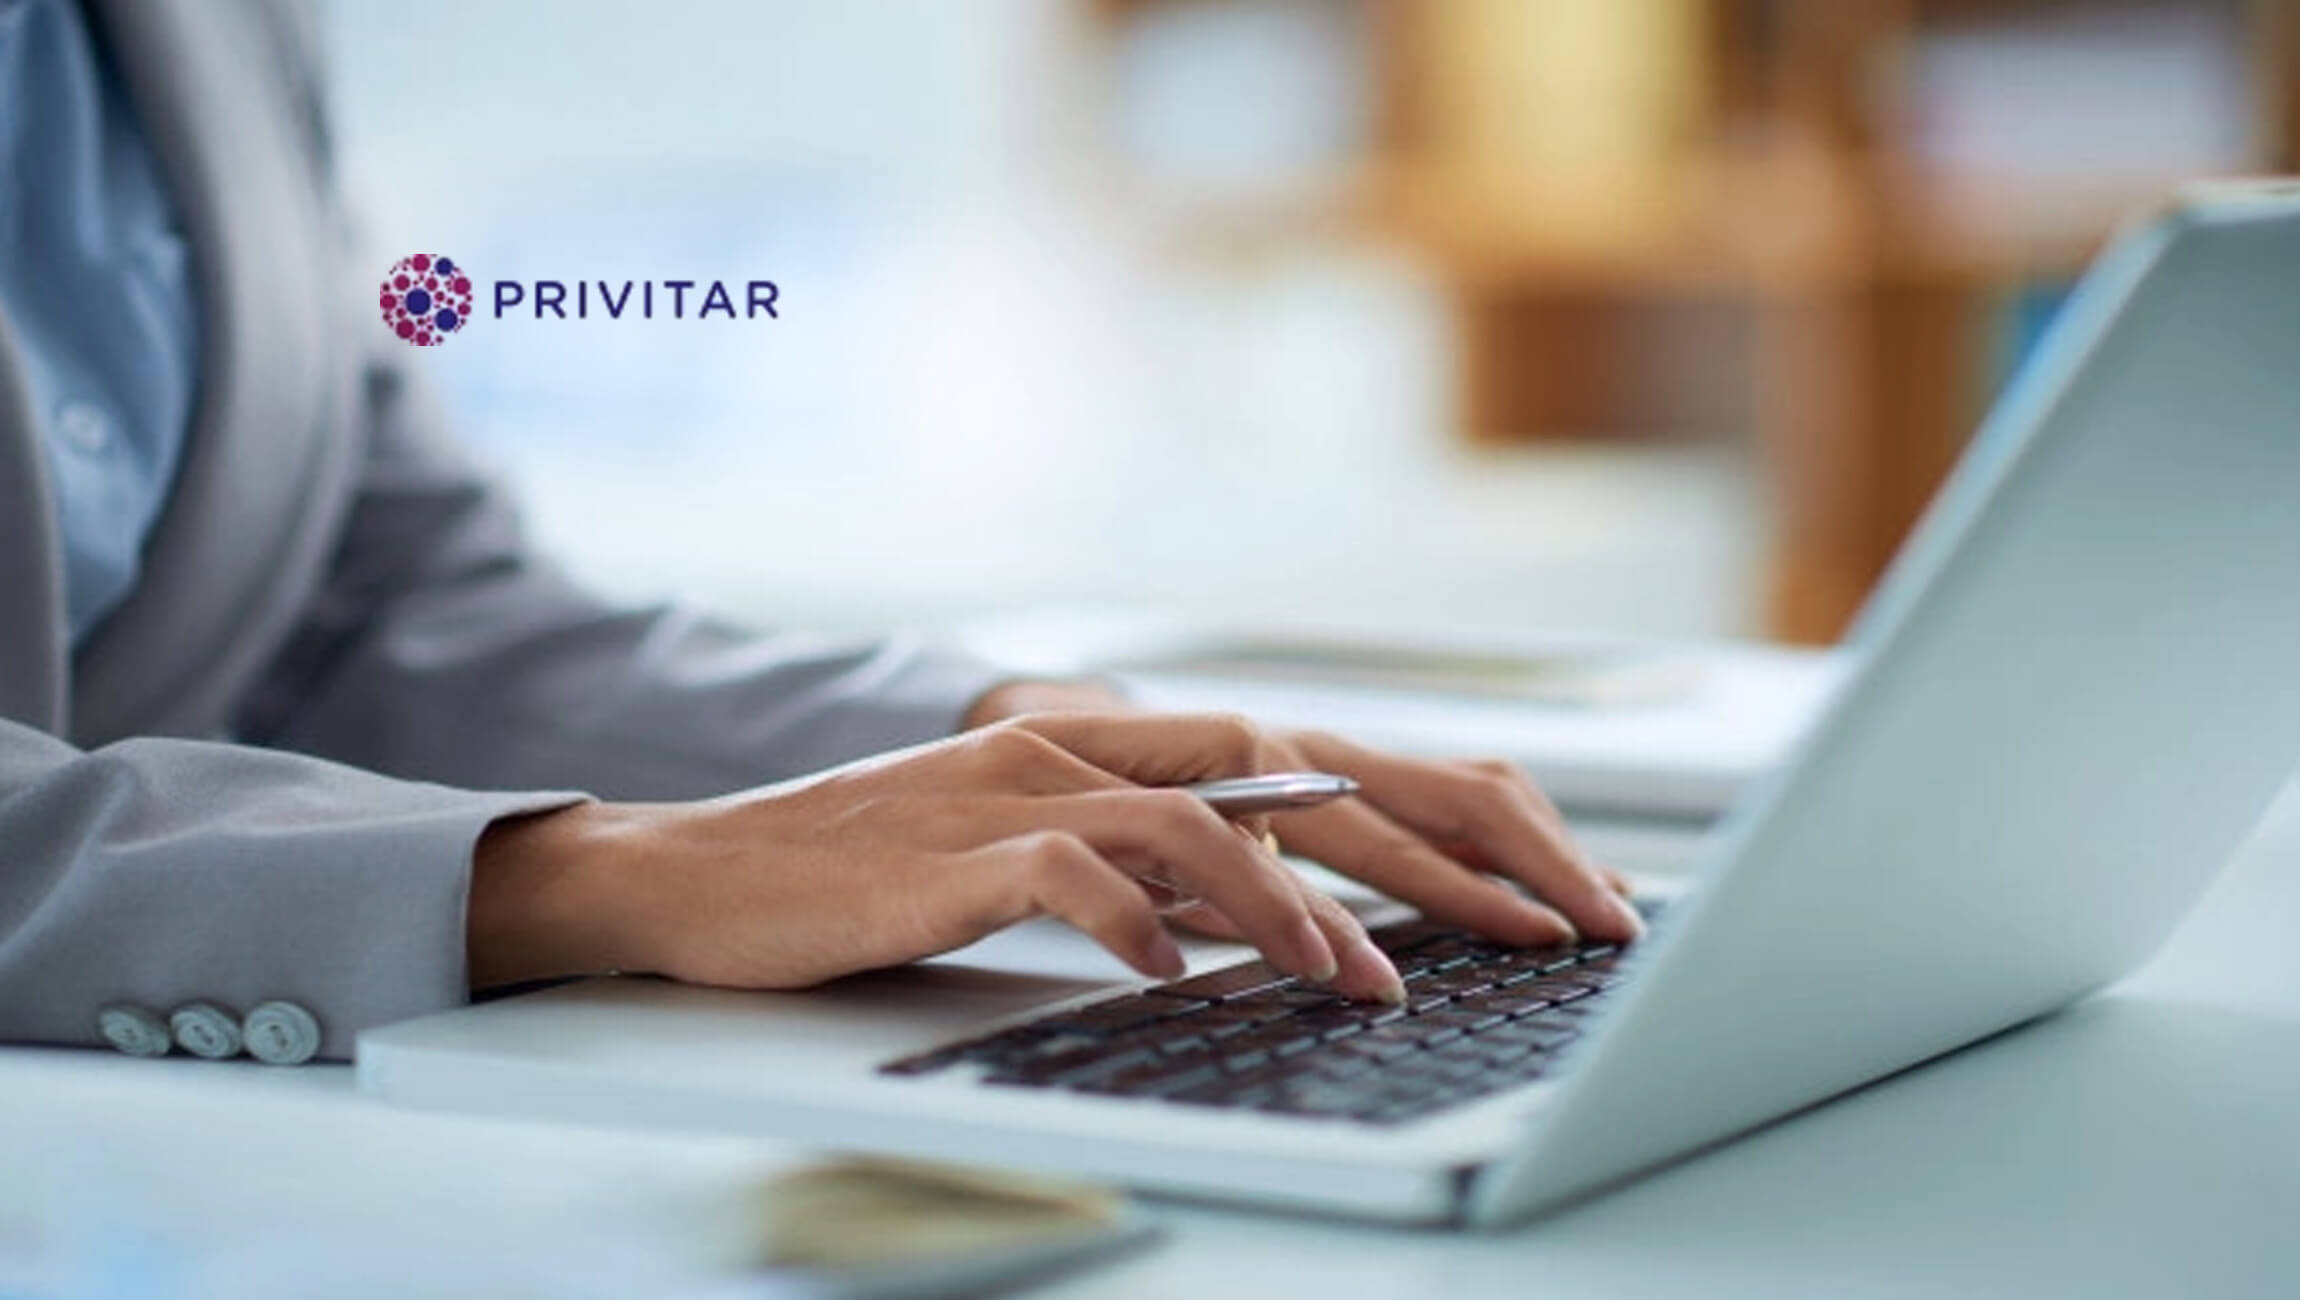 Privitar Strengthens HIPAA Compliance-Focused Features, Launches New “Fast Start” Rules Packs